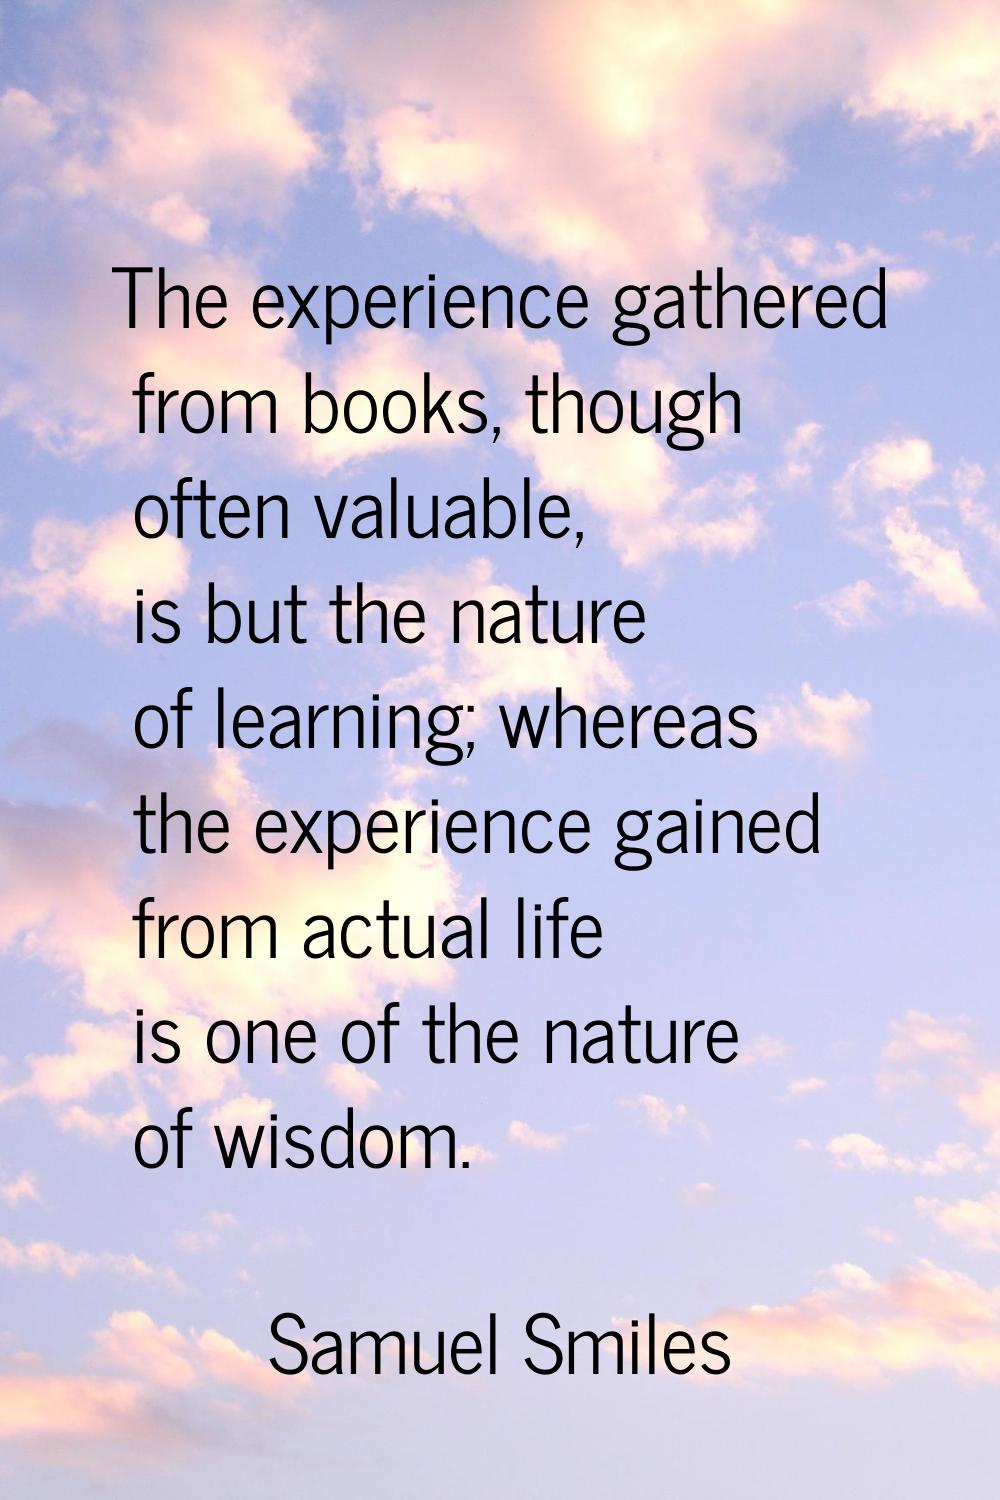 The experience gathered from books, though often valuable, is but the nature of learning; whereas t